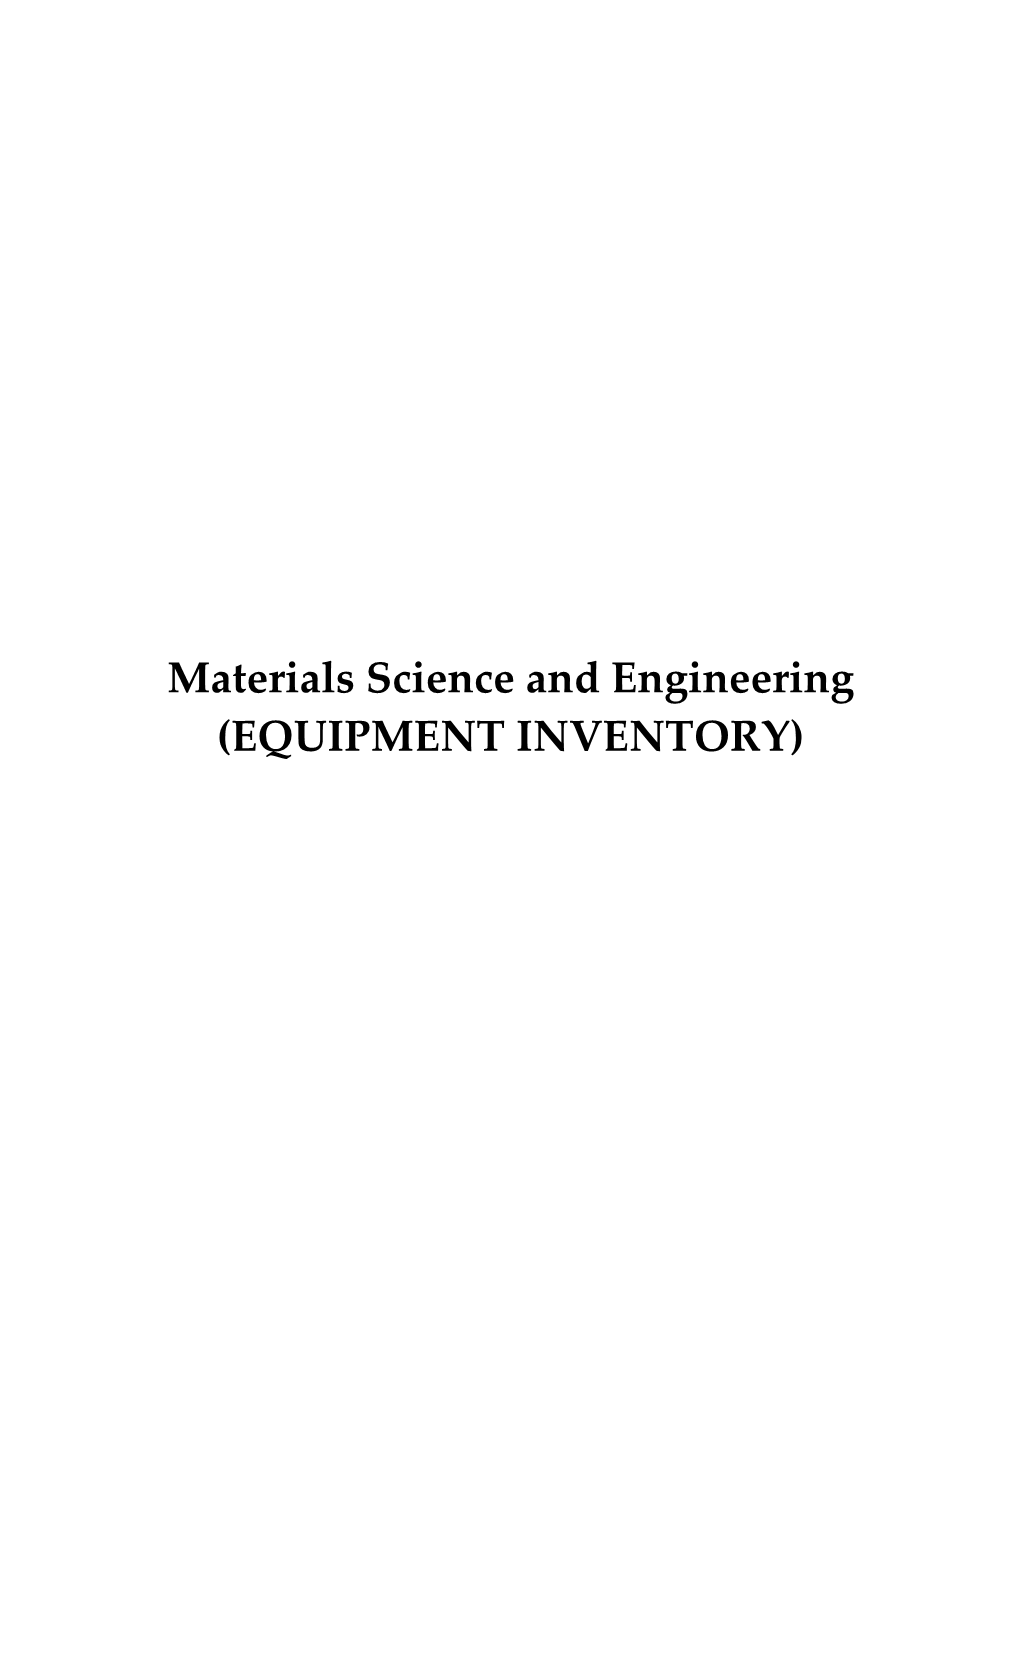 Materials Science and Engineering (EQUIPMENT INVENTORY) Equipment and Facilities (Sirrine Hall)